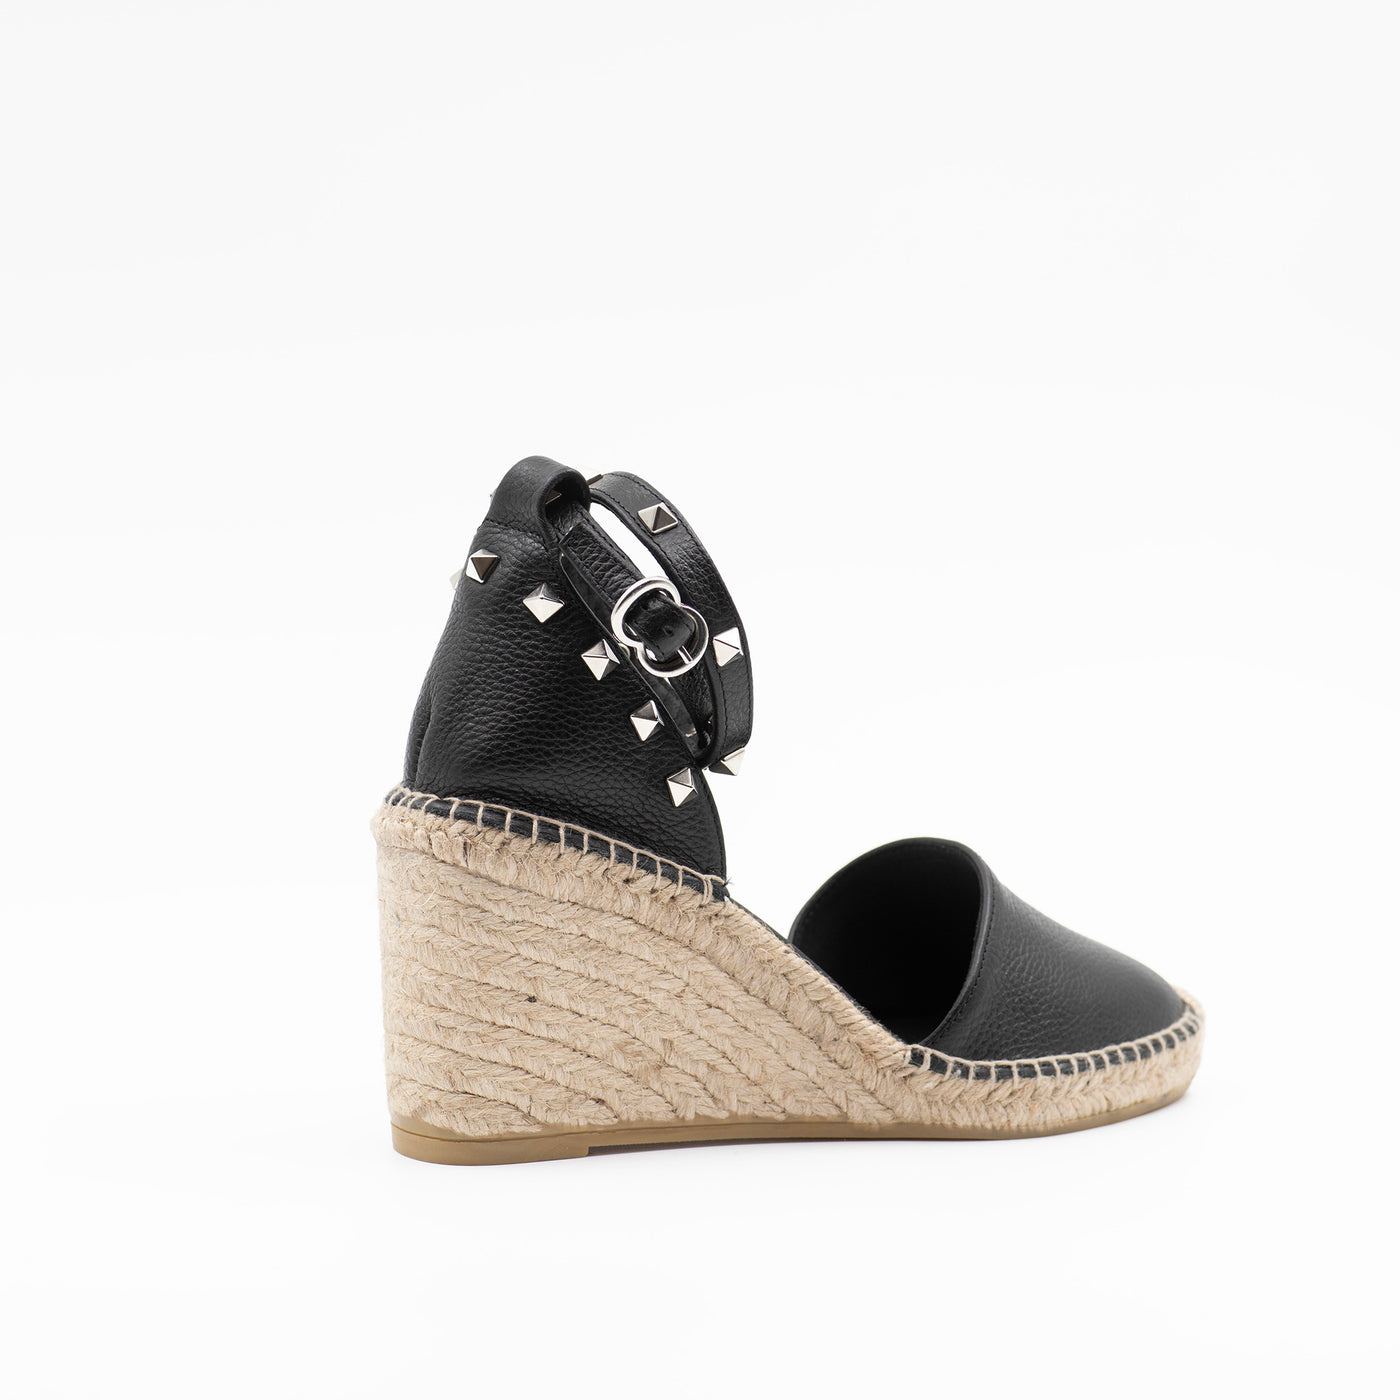 Black wedge espadrille with studs